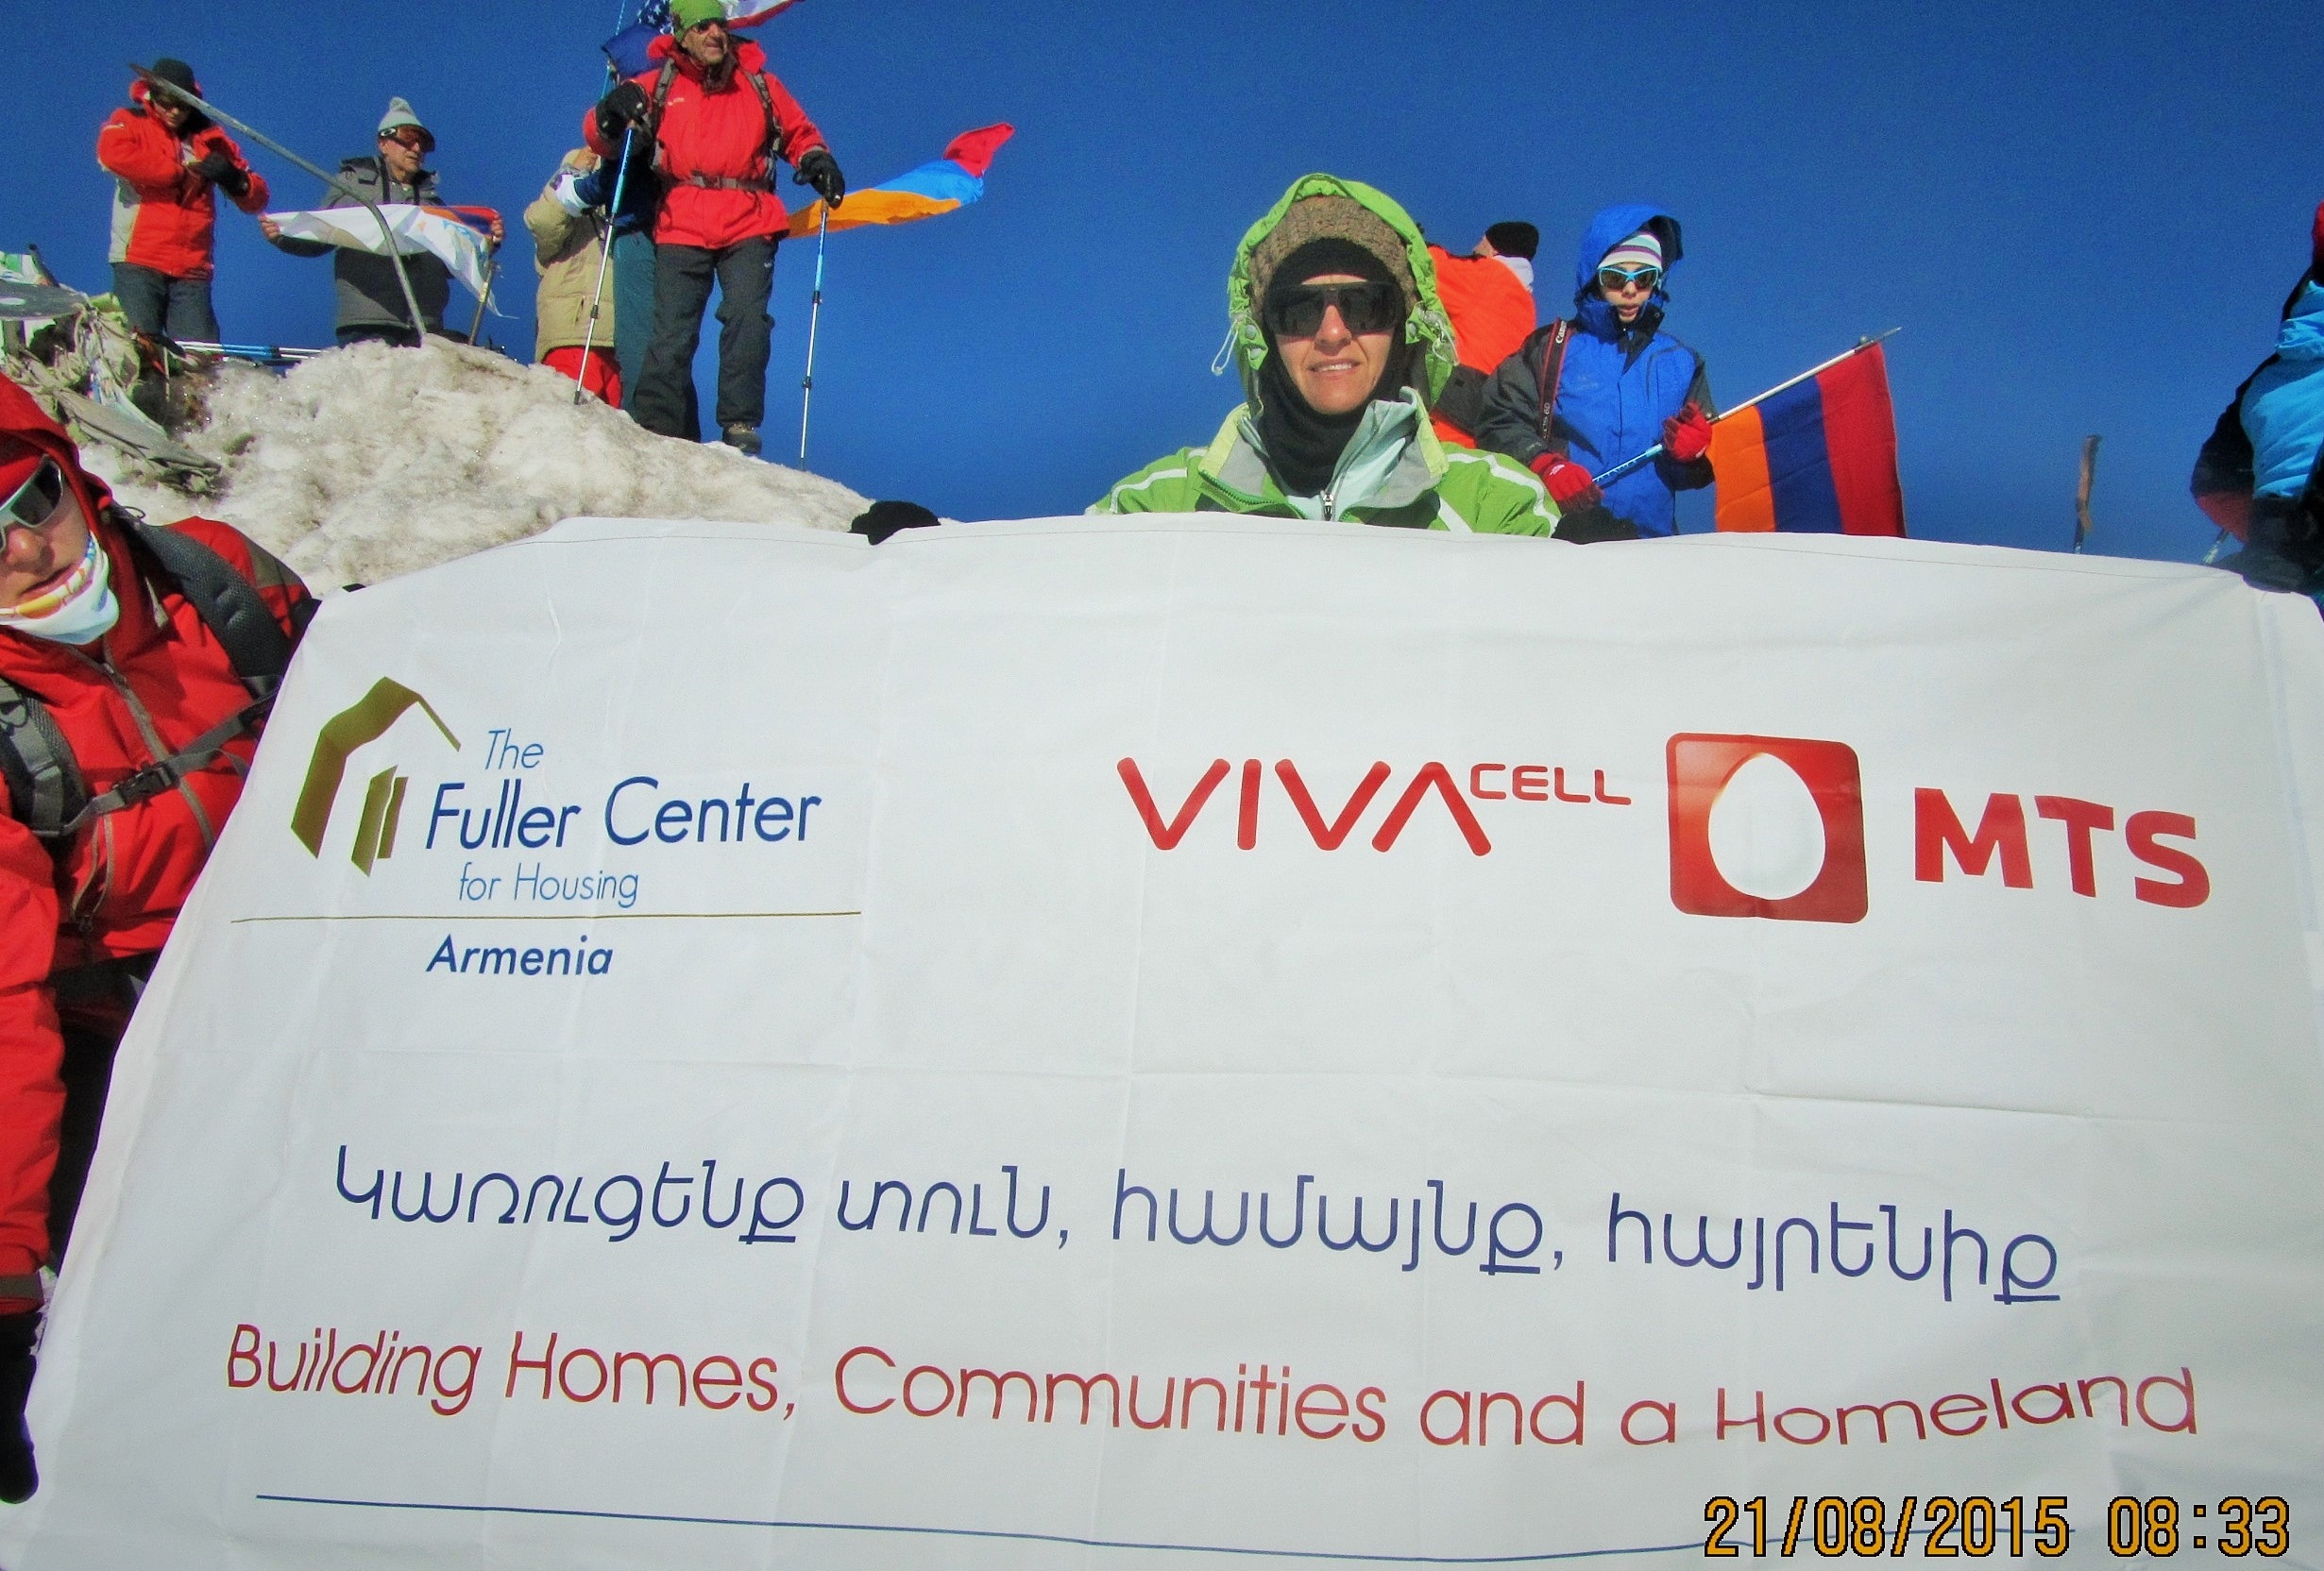 Fuller Center for Housing Armenia Honors the 10th Anniversary of its Largest Partner by Raising the Partnership Flag on the Top of Biblical Mt. Ararat, 5165m High